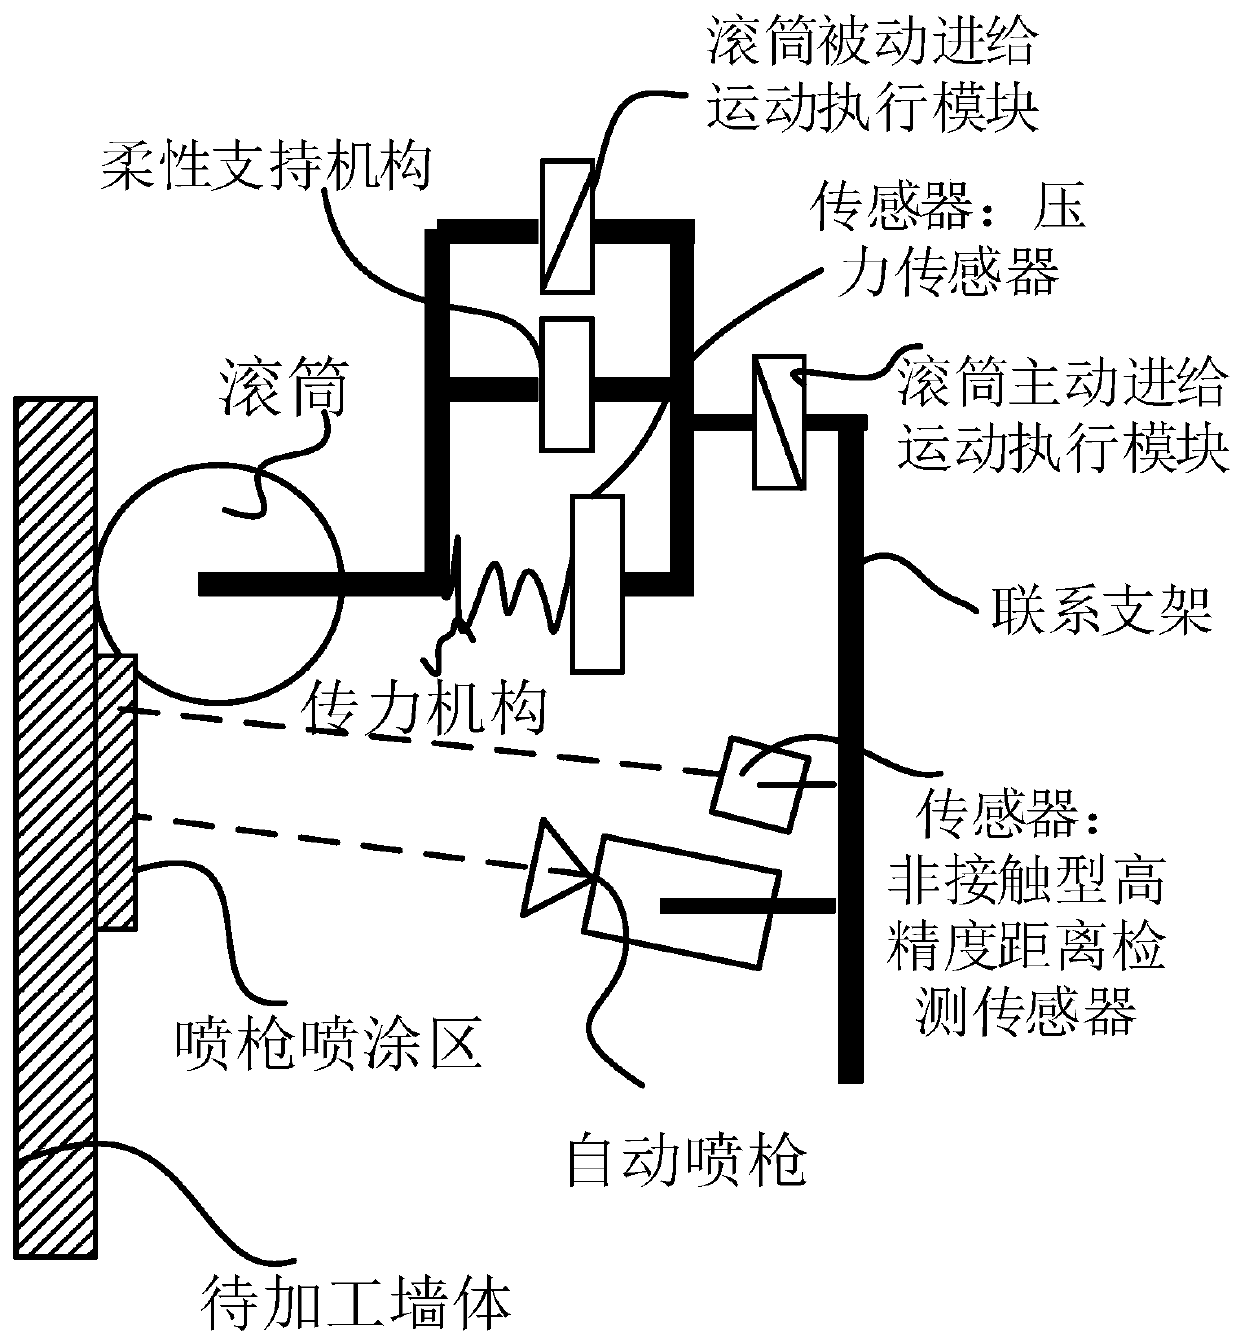 Roller coating method for finishing operation by combining automatic spray gun and roller of robot